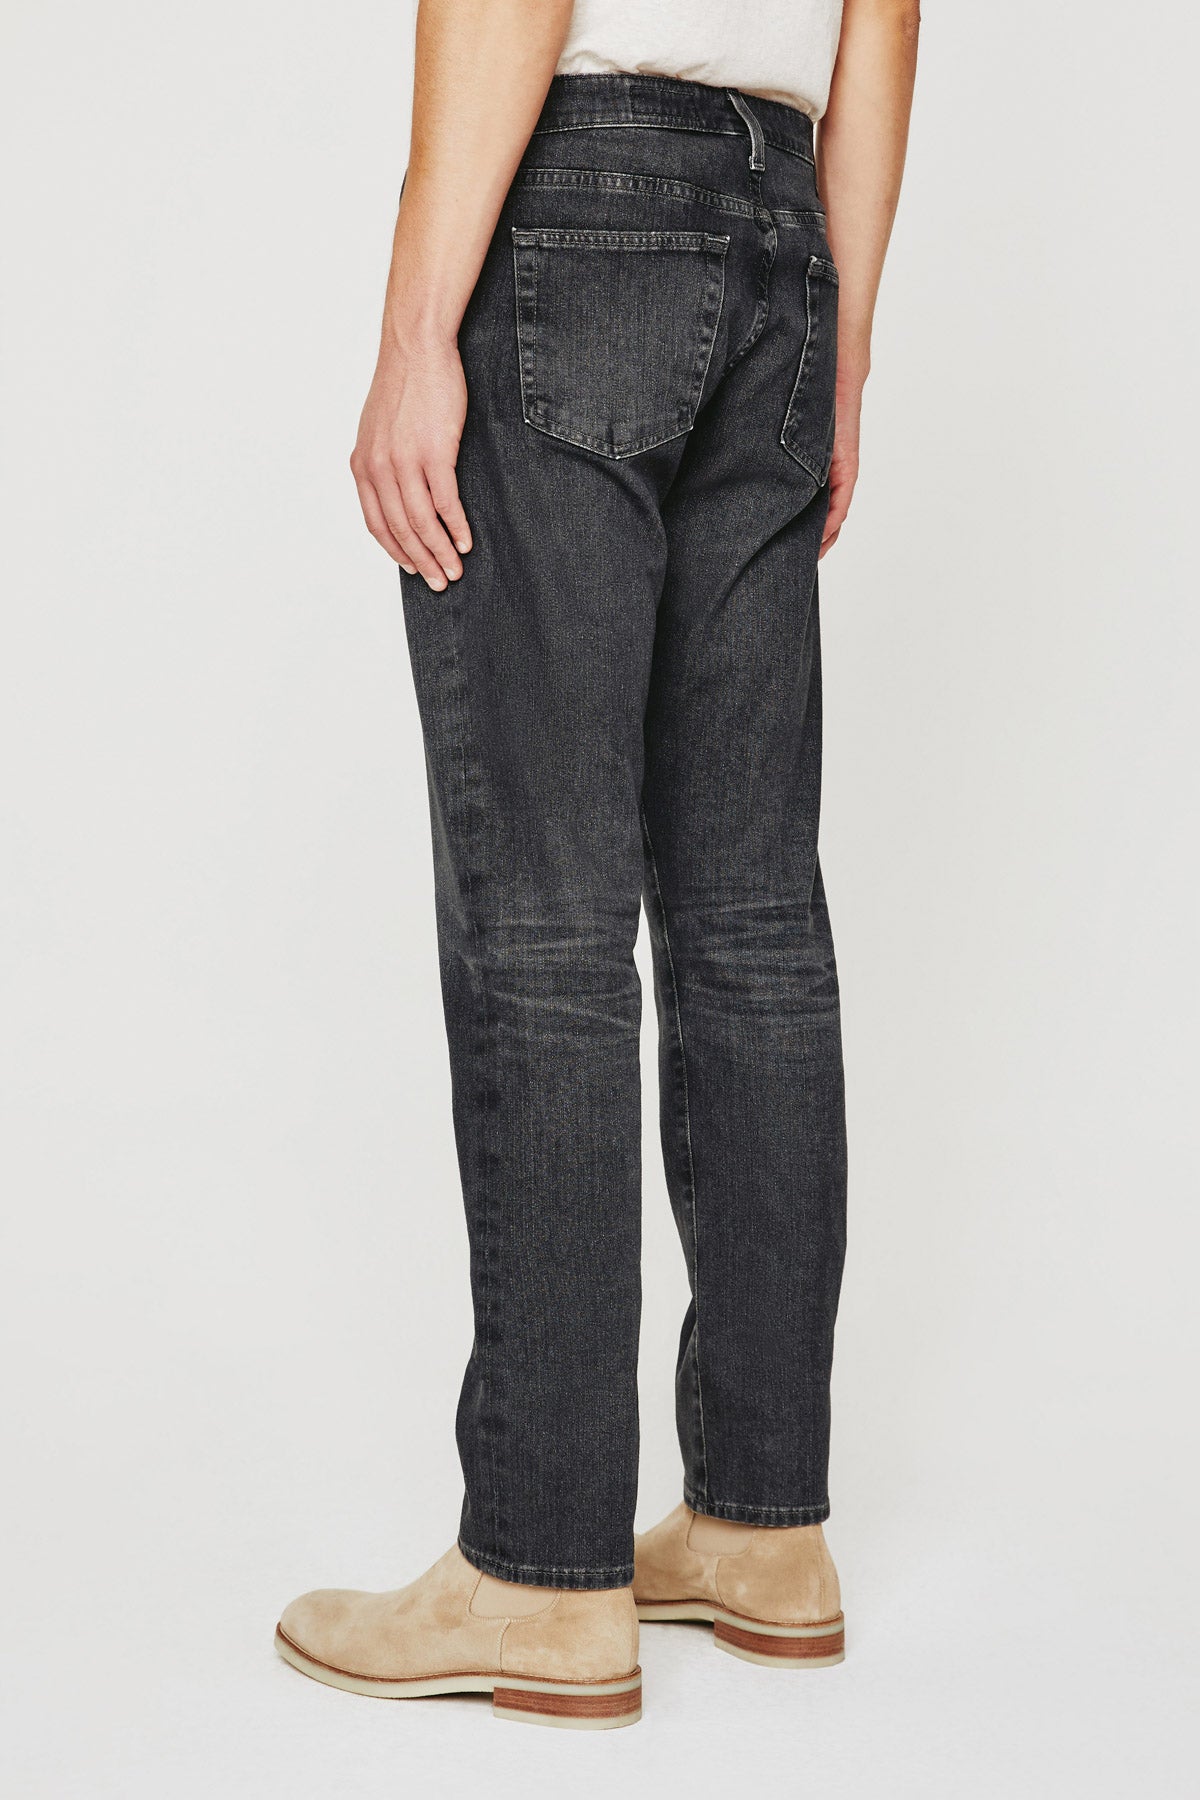 ag jeans dylan slim fit jean in 13 years curtis grey, rear view